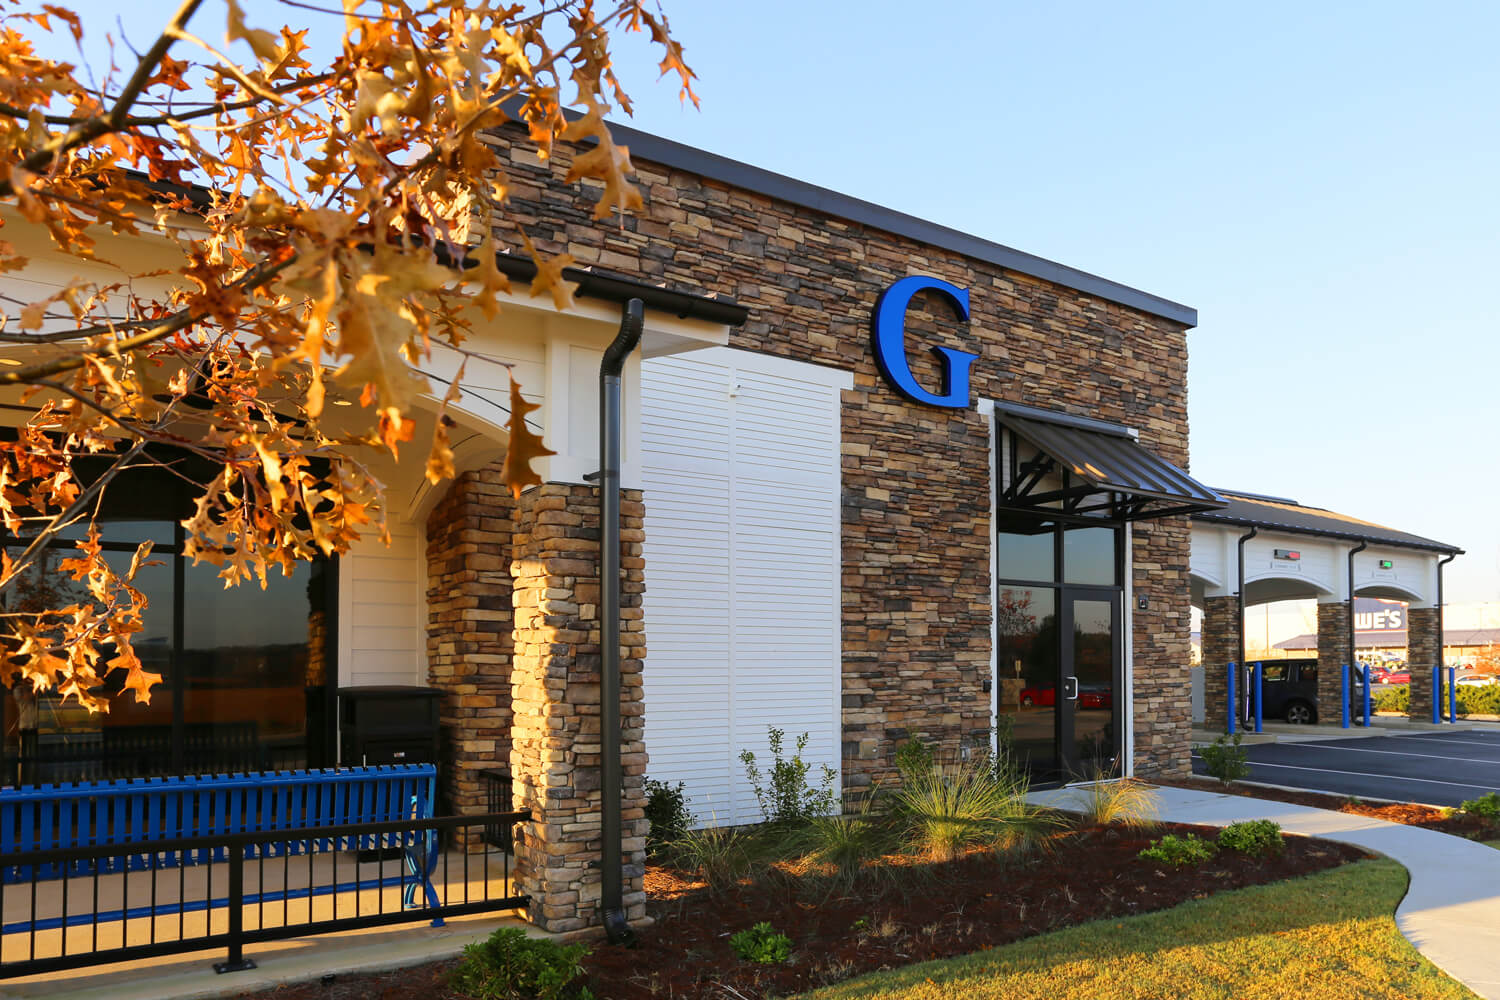 Guardian Credit Union - Wetumpka - Porch and Drive Through - Designed by Foshee Architecture